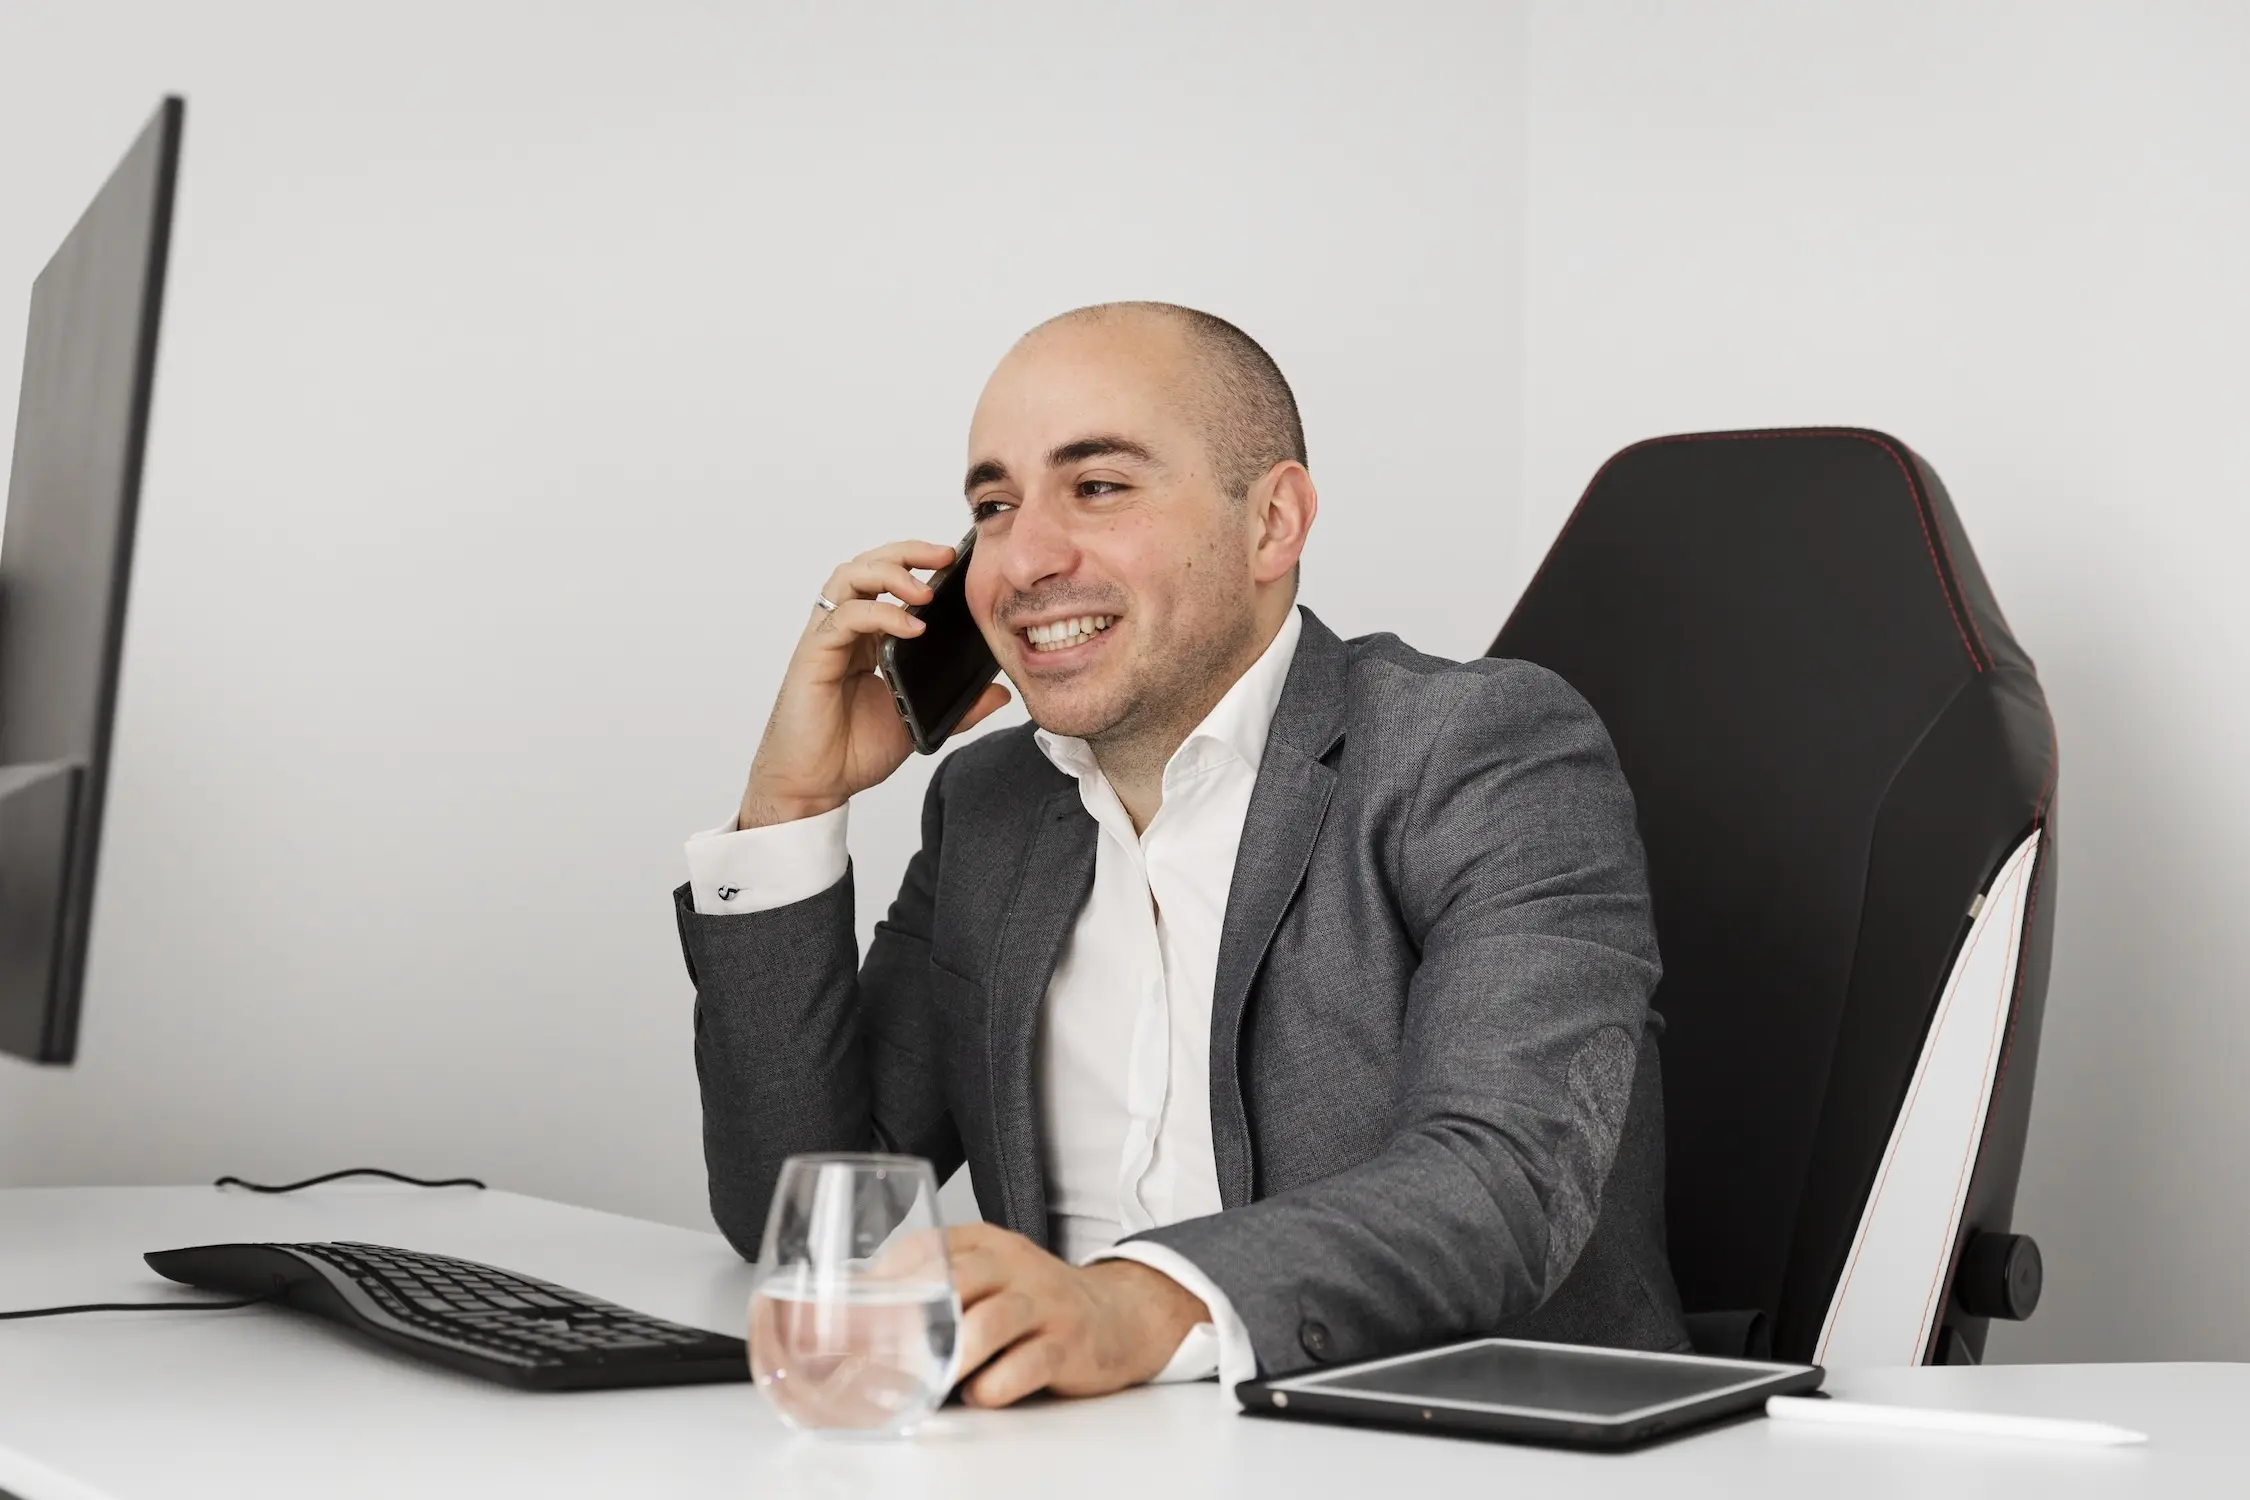 Robert Daniele talking on the phone with a client at his computer with a glass of water.